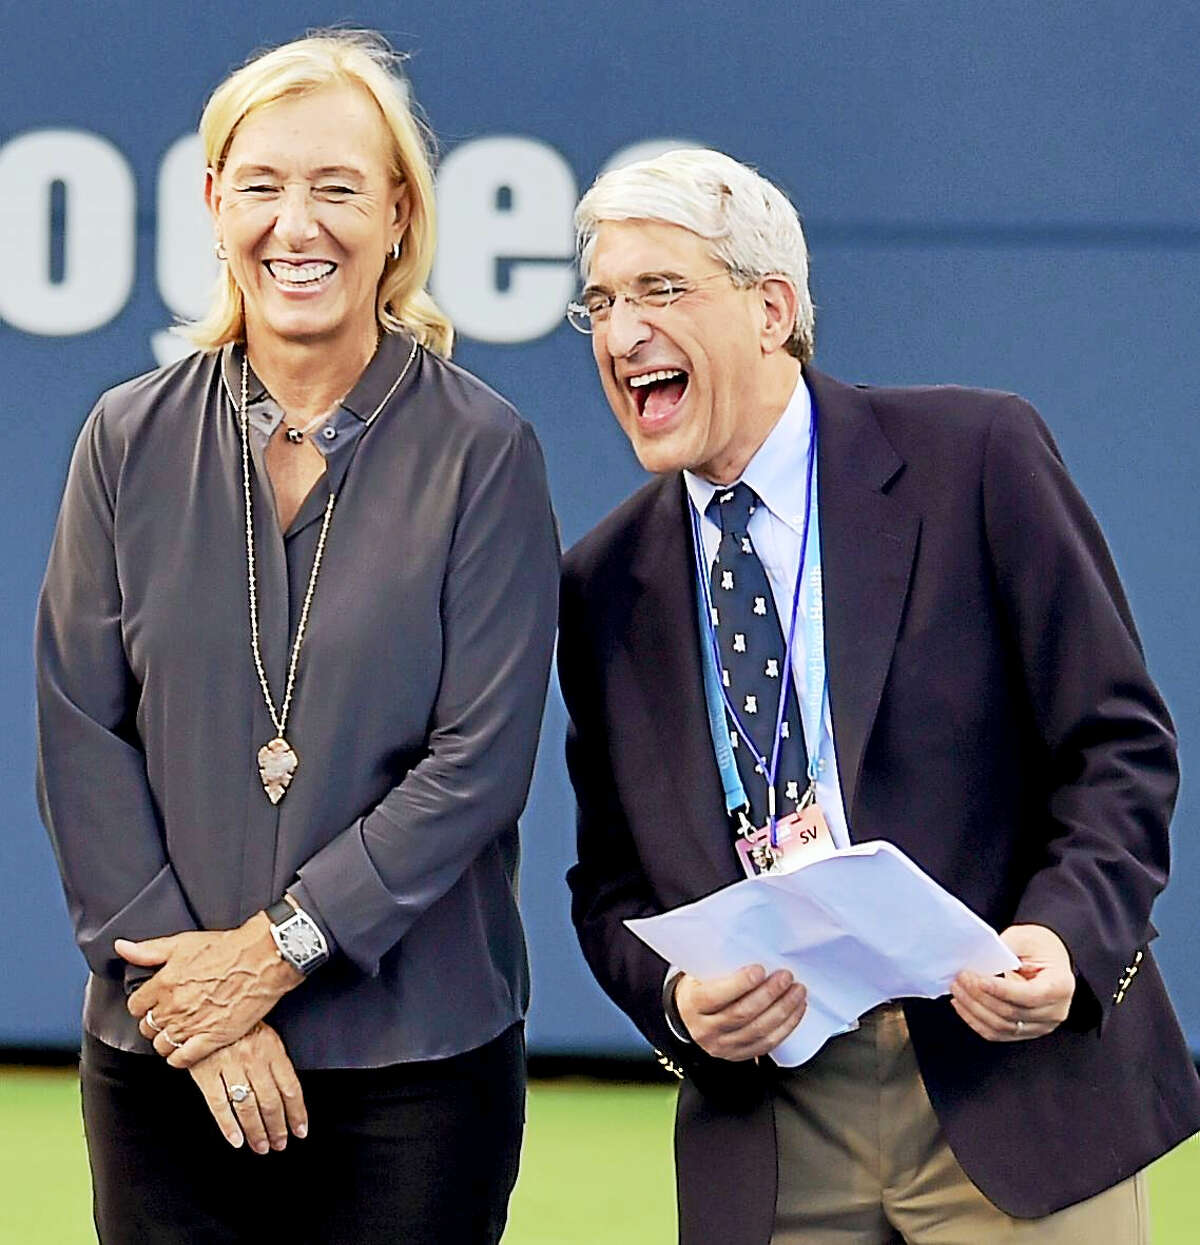 (Peter Hvizdak / Hearst Connecticut Media) New Haven,Connecticut: Monday, August 21, 2017. Legendary tennis player Martini Navratilova and Yale University President Peter Salovey share a light moment at the start of the Connecticut Open 20th Anniversary Celebration Opening Ceremony Monday evening at the Connecticut Tennis Center.